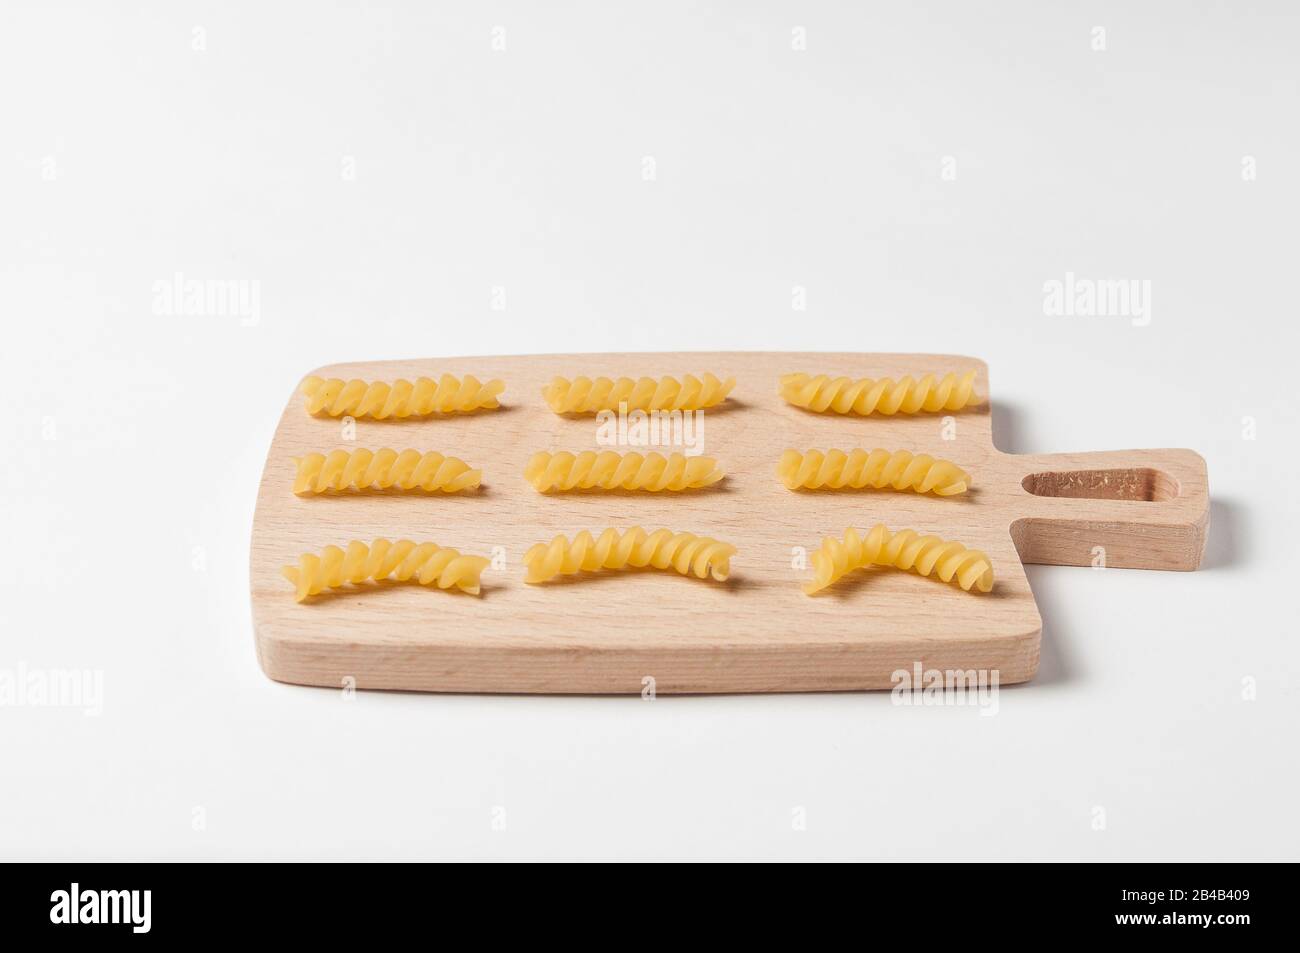 Italian food. One of the tipe of Italian pasta on a wooden board Stock Photo